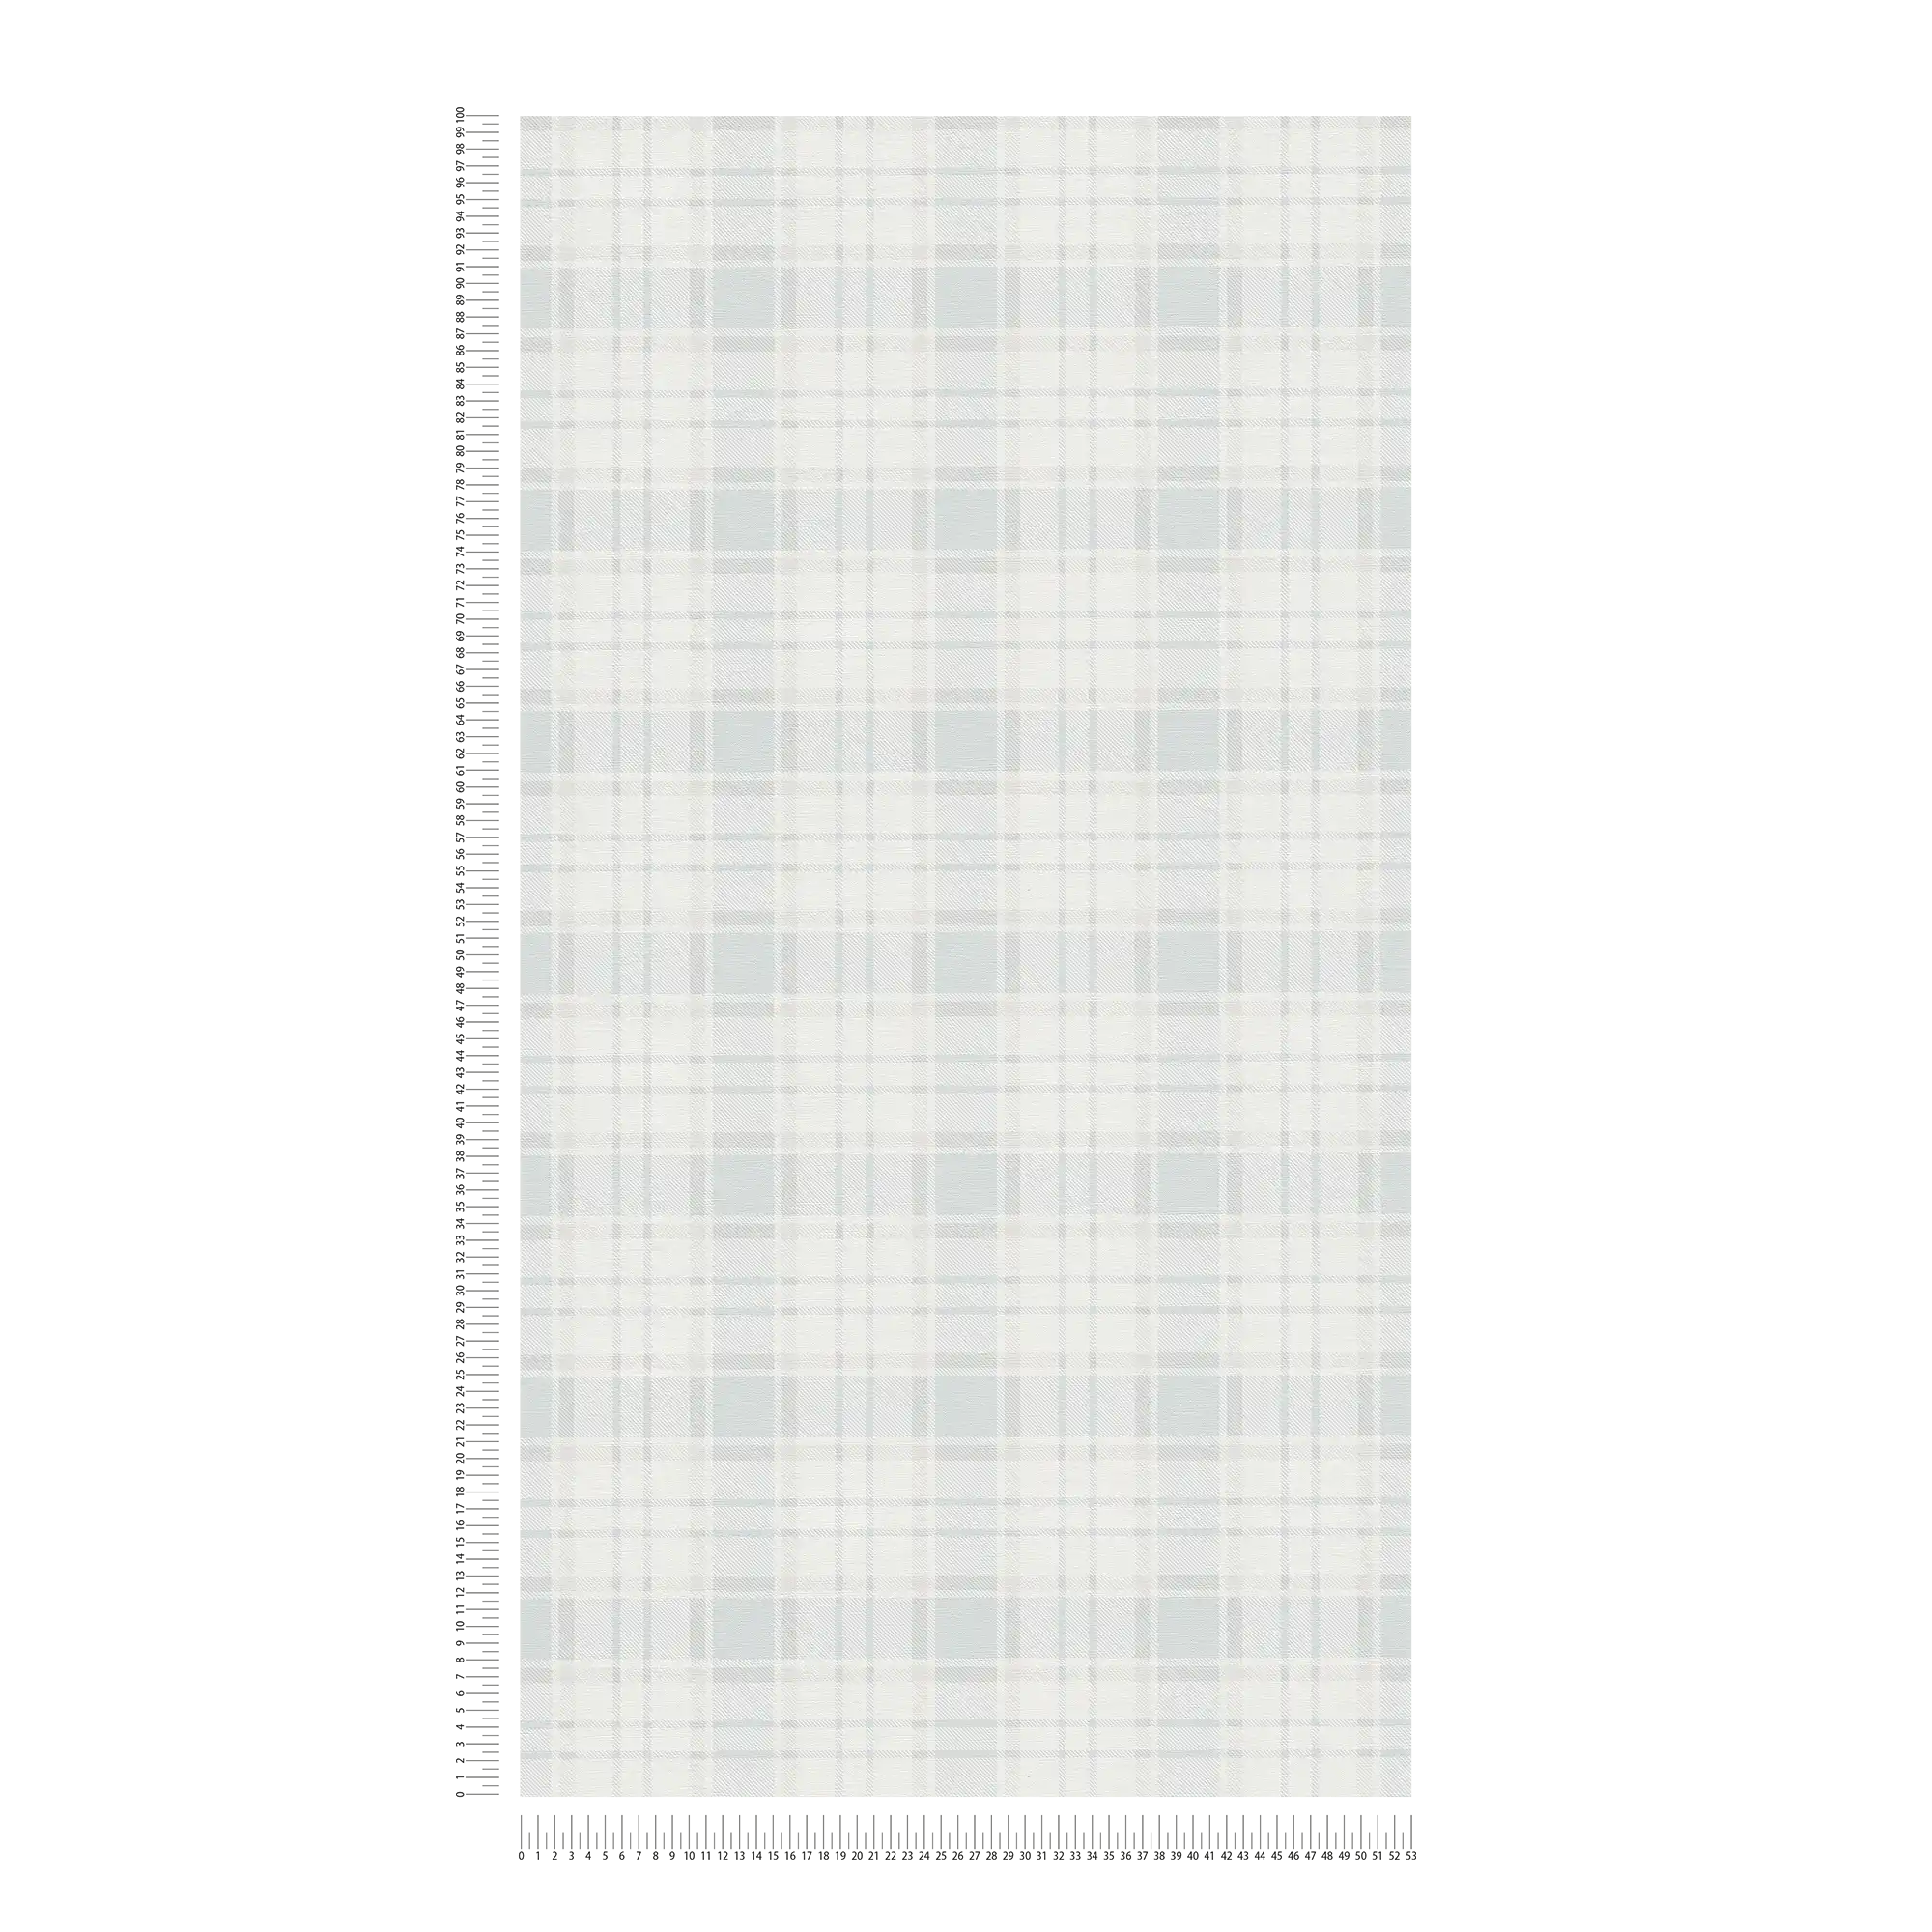             Non-woven wallpaper country style chequered - pink, white
        